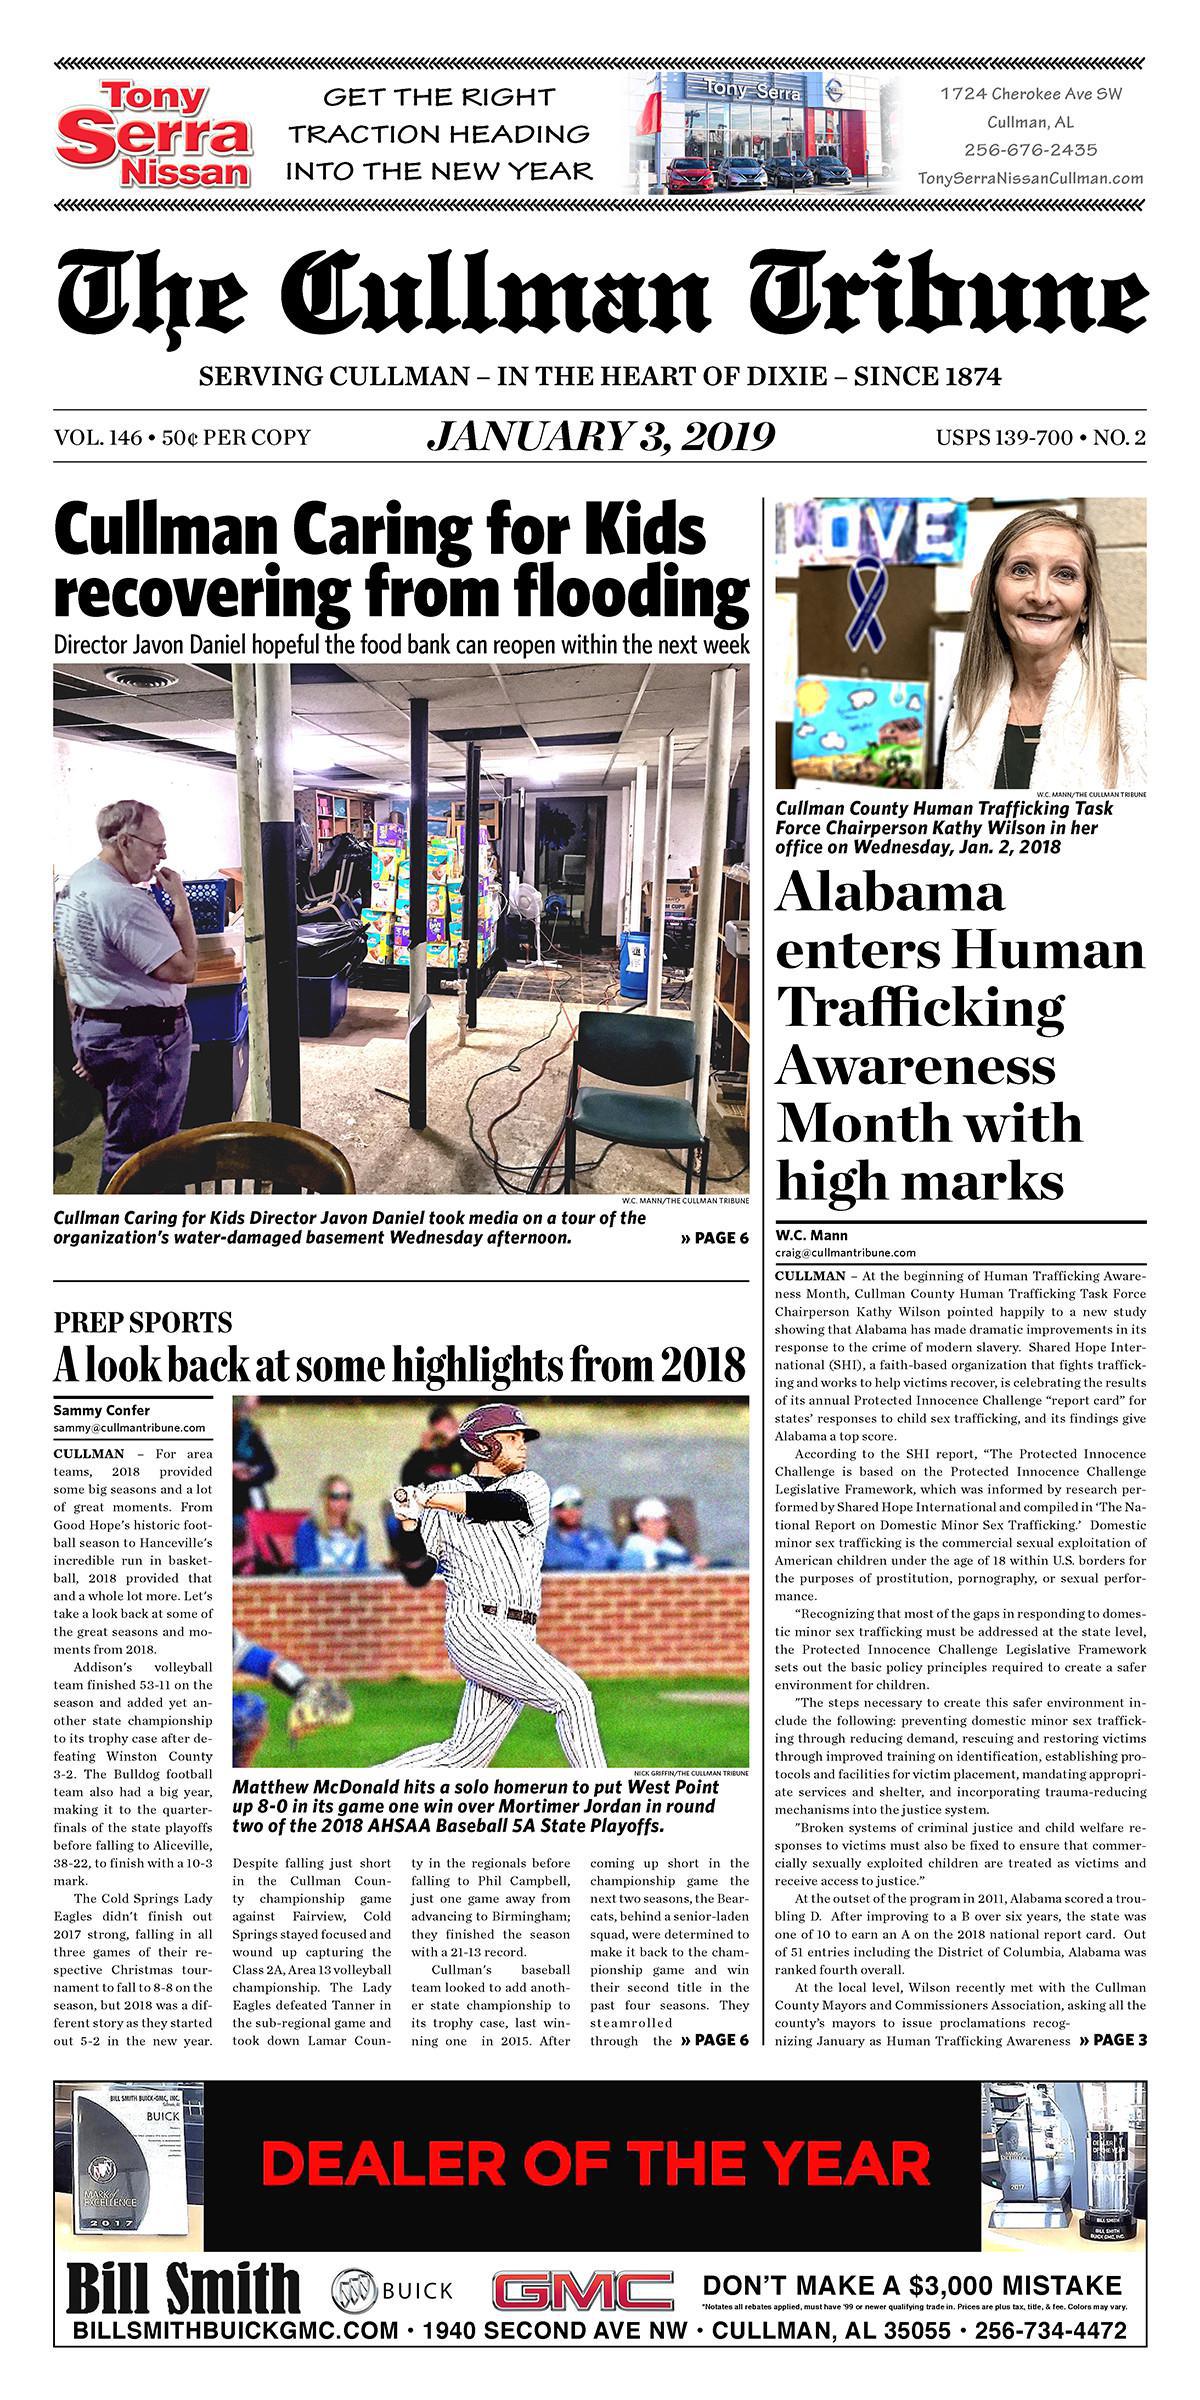 Good Morning Cullman! The 01-03-2019 edition of the Cullman Tribune is now ready to view